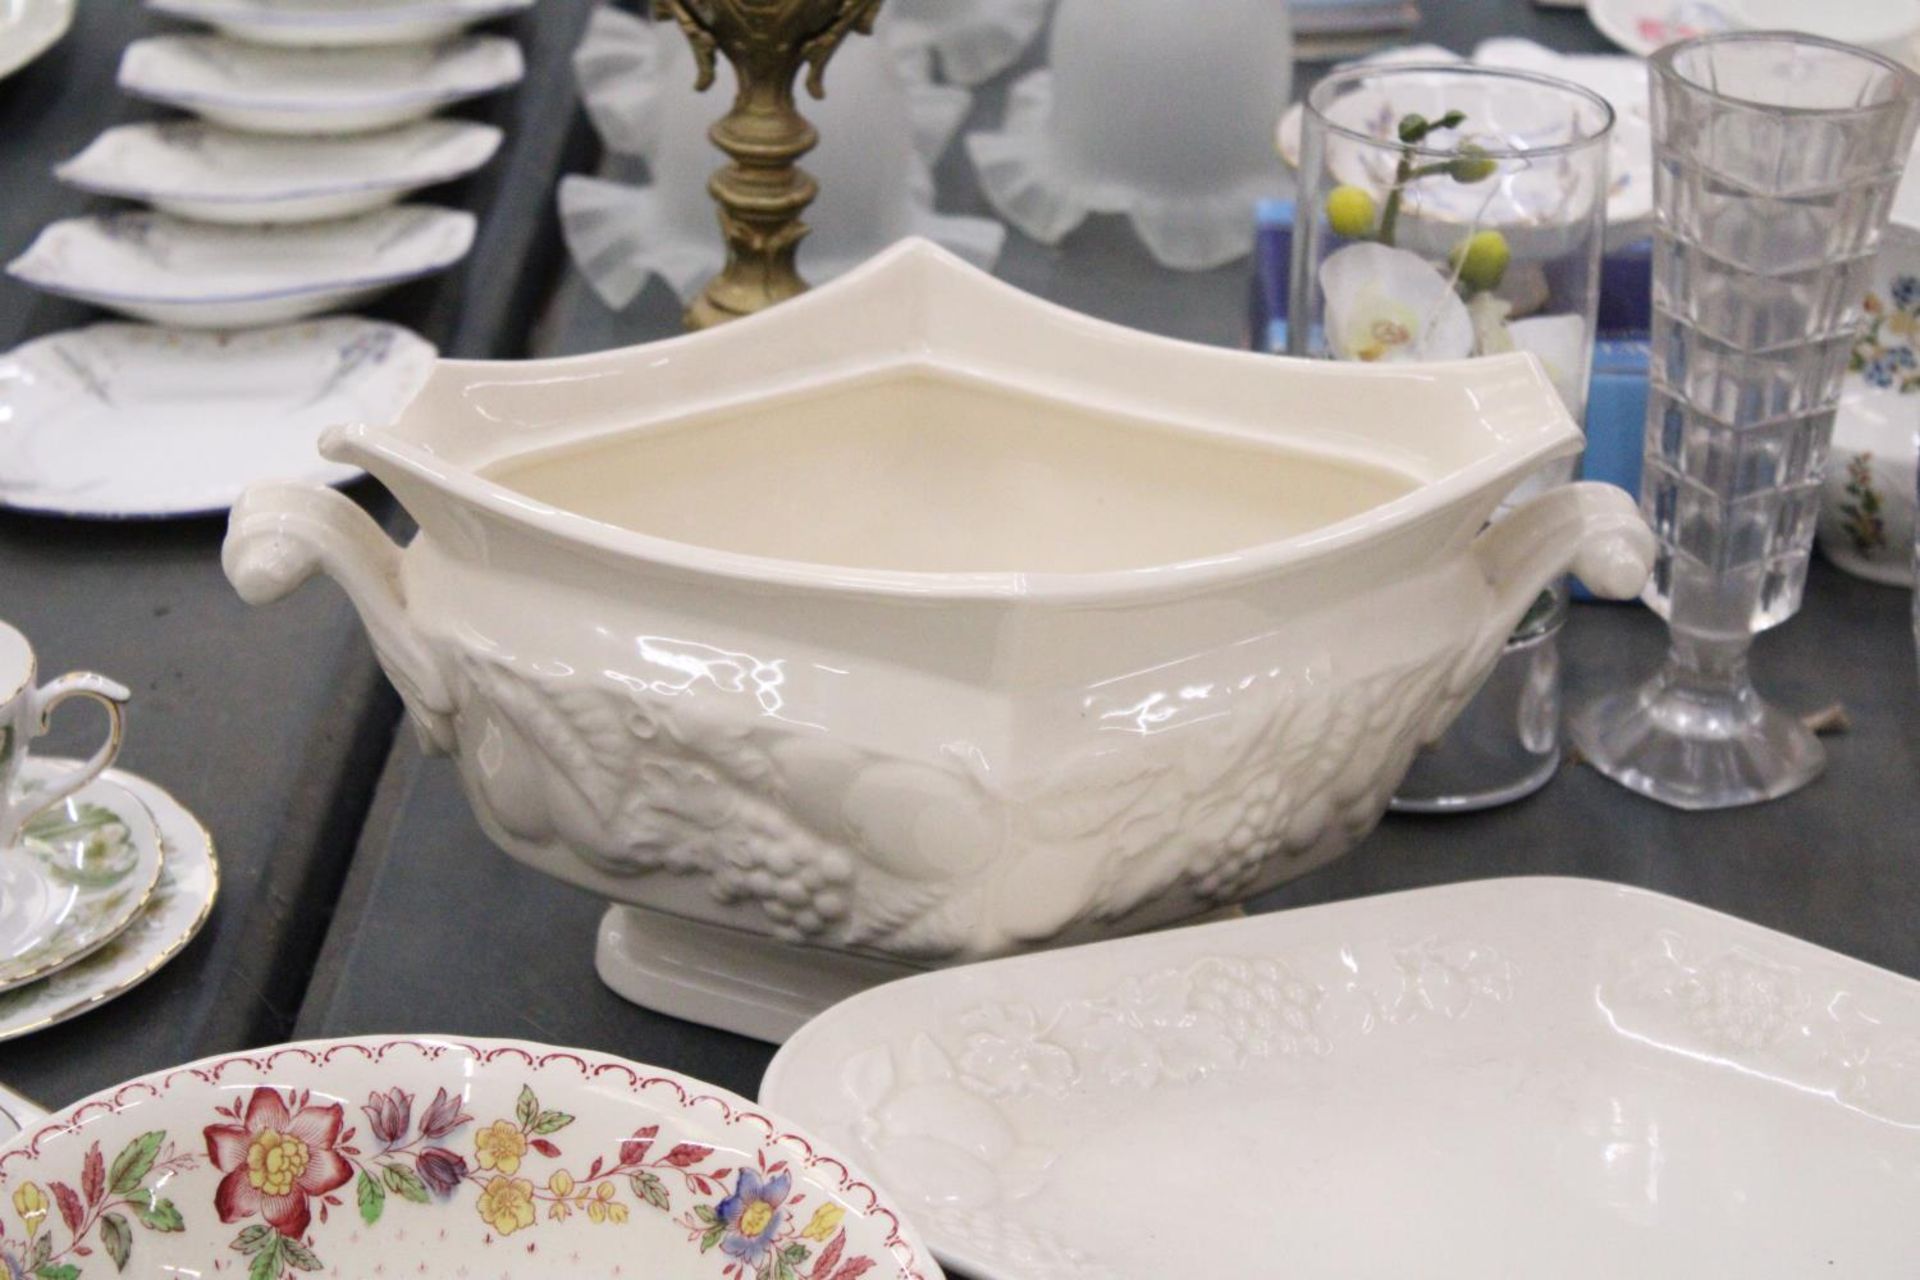 THREE LARGE PIECES OF ROYAL WORCESTER TO INCLUDE A SERVING DISH, SERVING PATE AND BOWL, ETC - Image 2 of 4